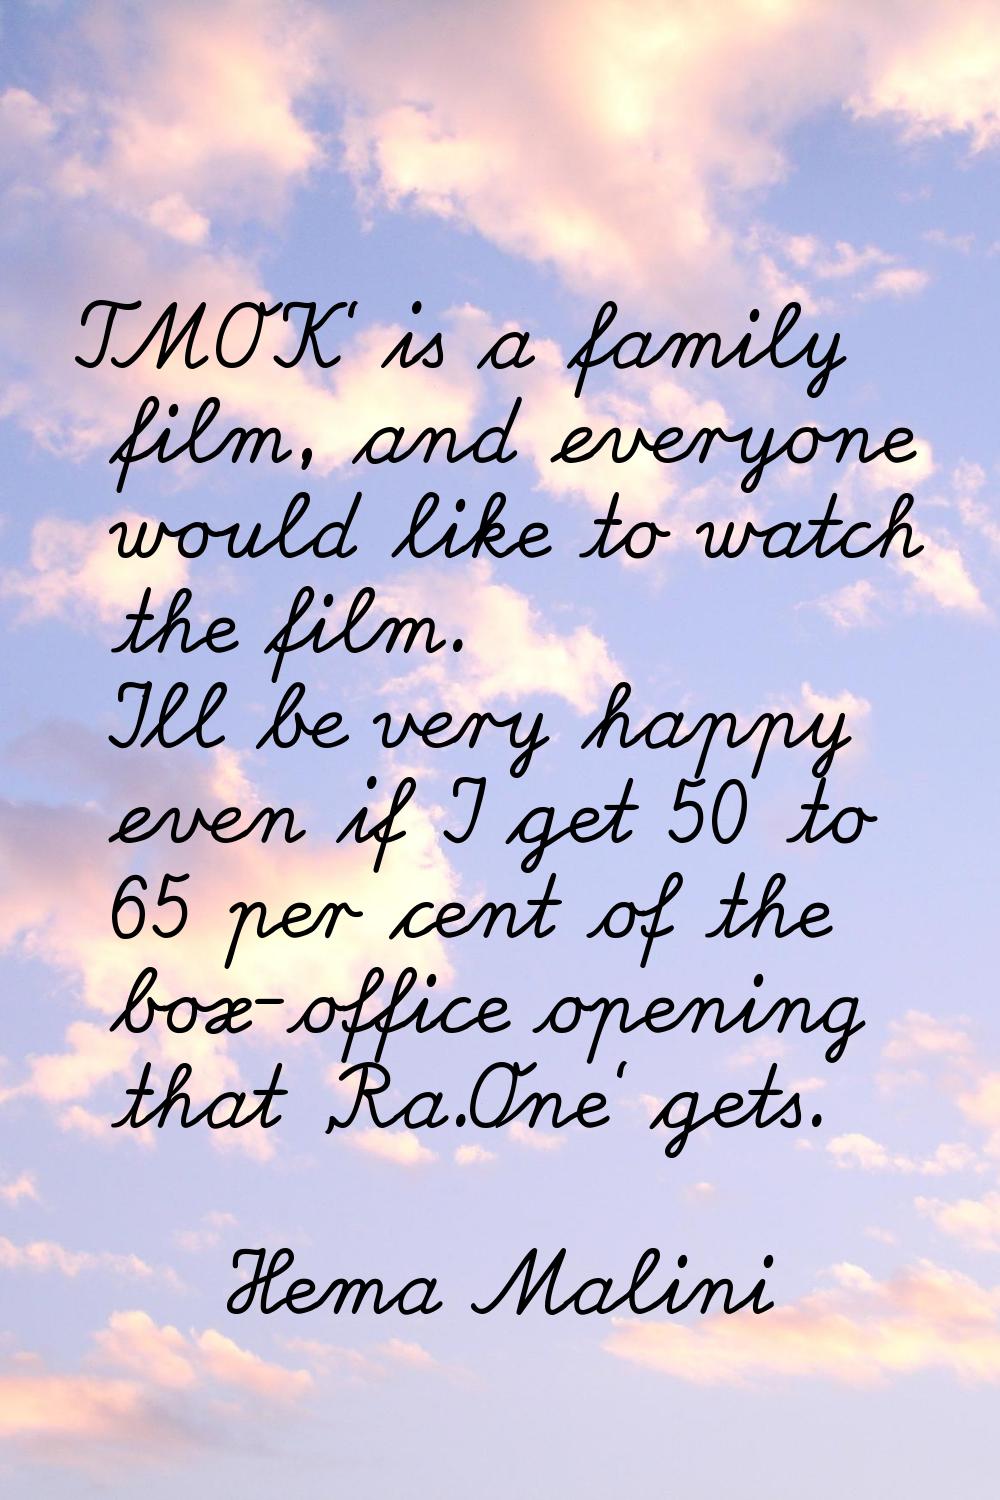 TMOK' is a family film, and everyone would like to watch the film. I'll be very happy even if I get